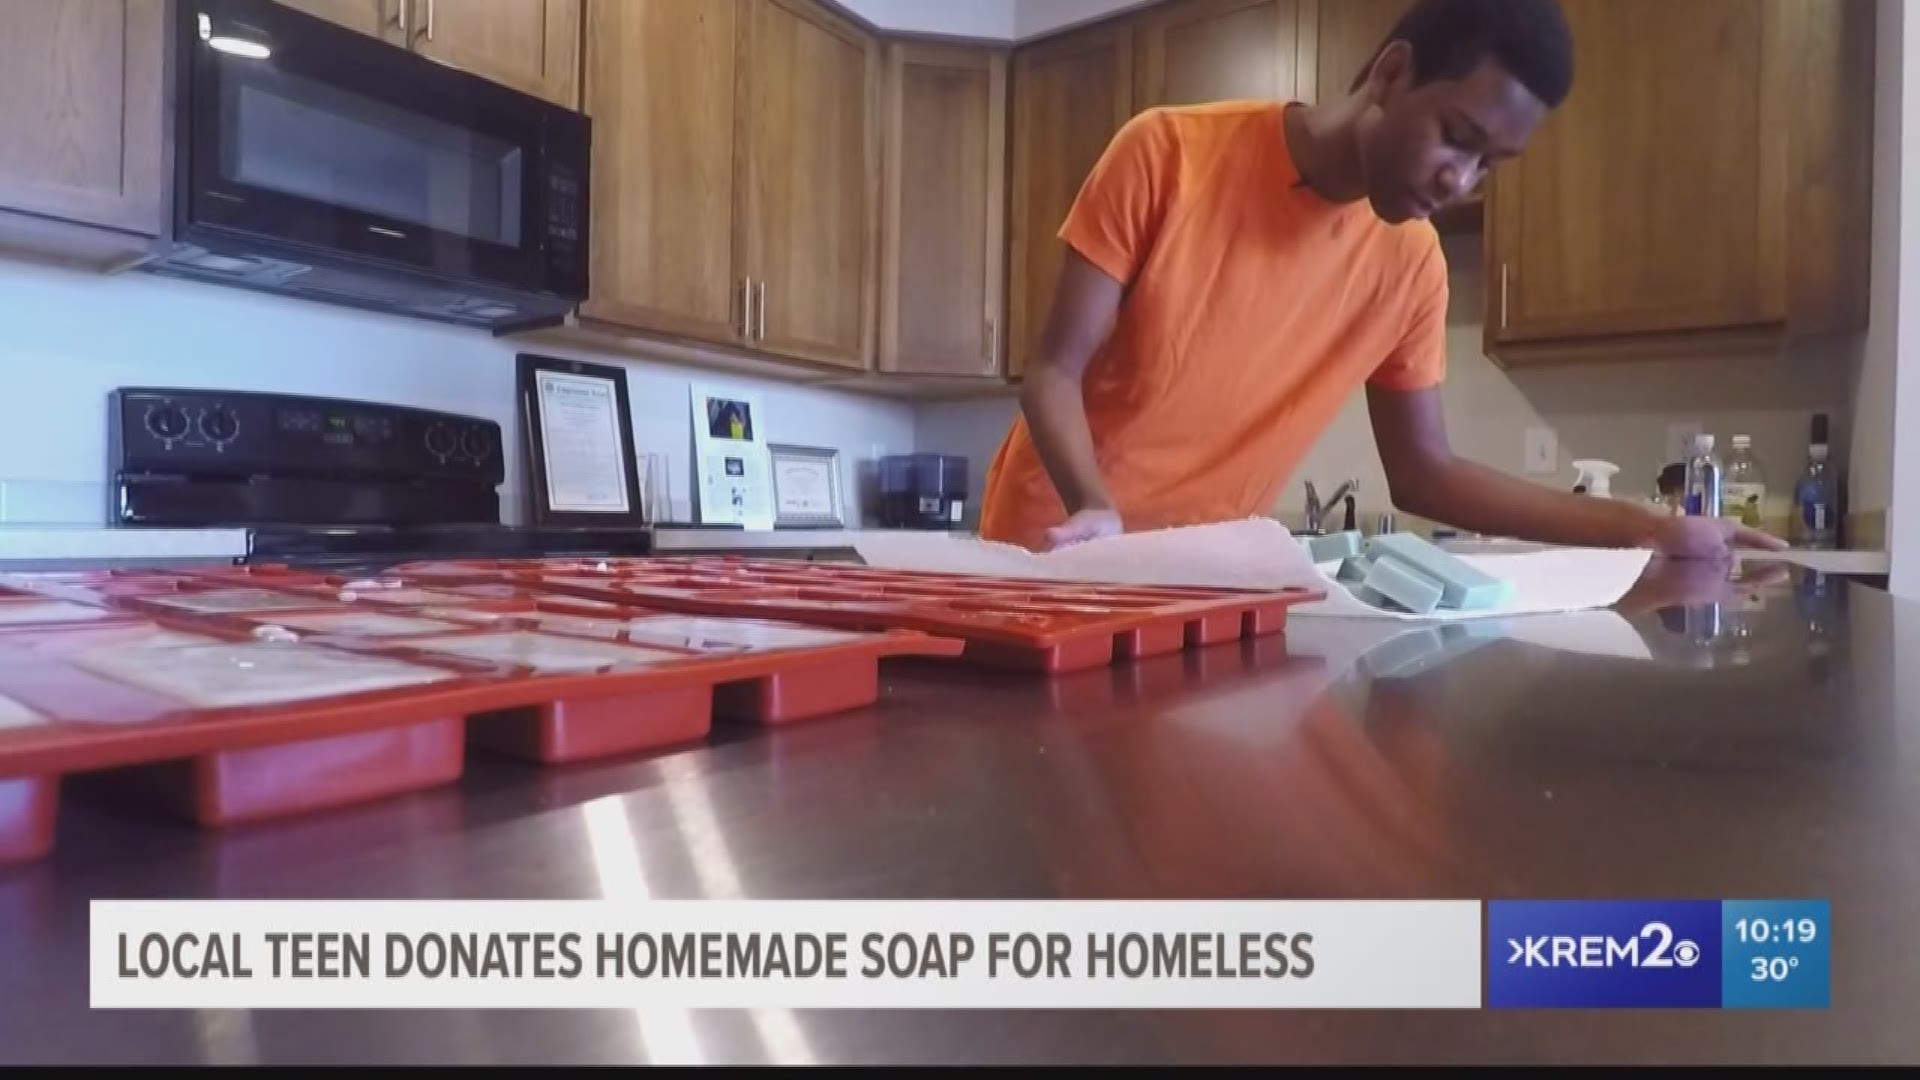 Every month, Donovan Smith works in his kitchen to make soap that he can donate to those in need.